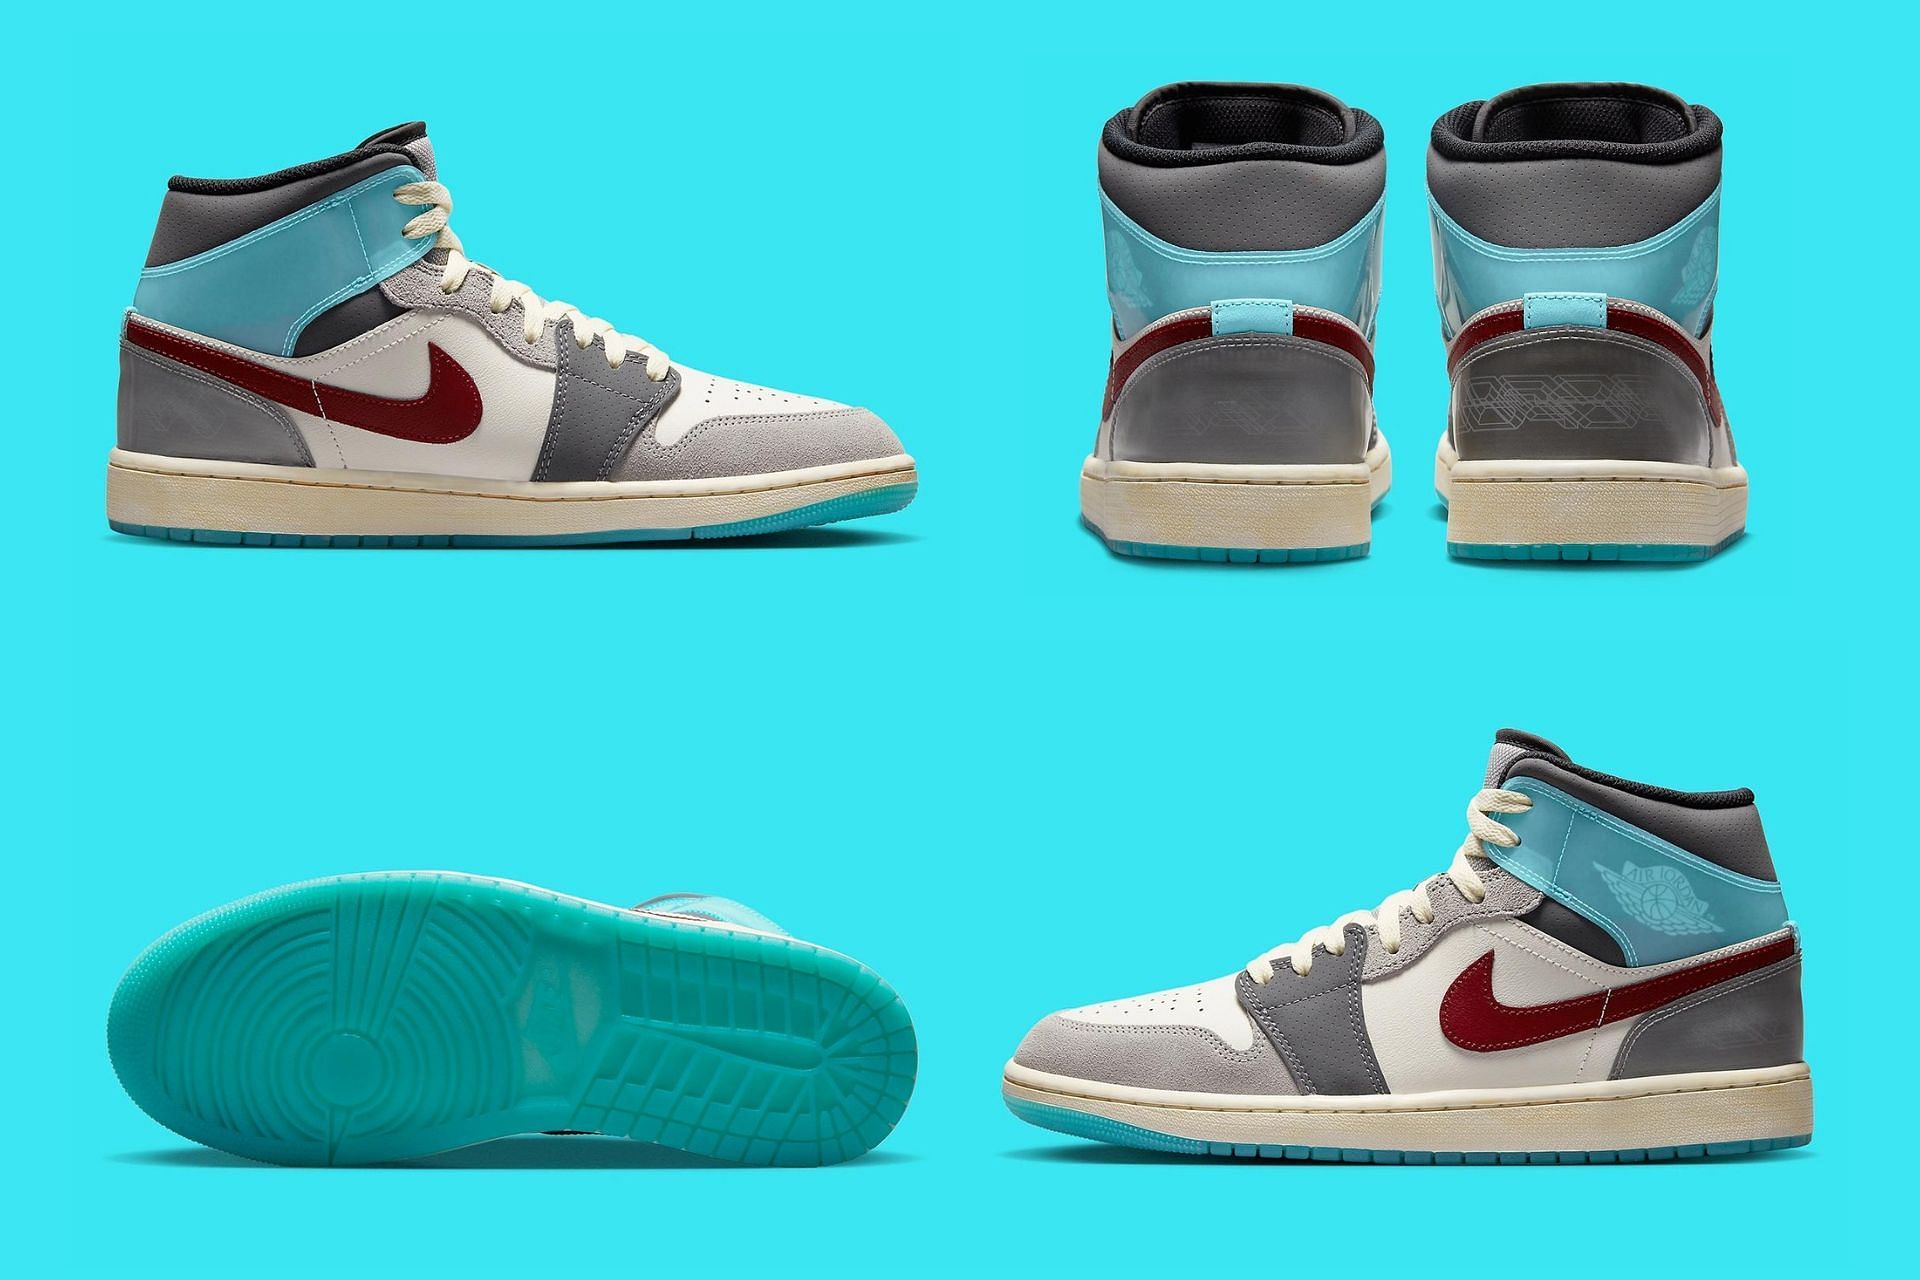 Where to buy Nike Air Jordan 1 Mid Exploration Unit sneakers? Everything we  know so far